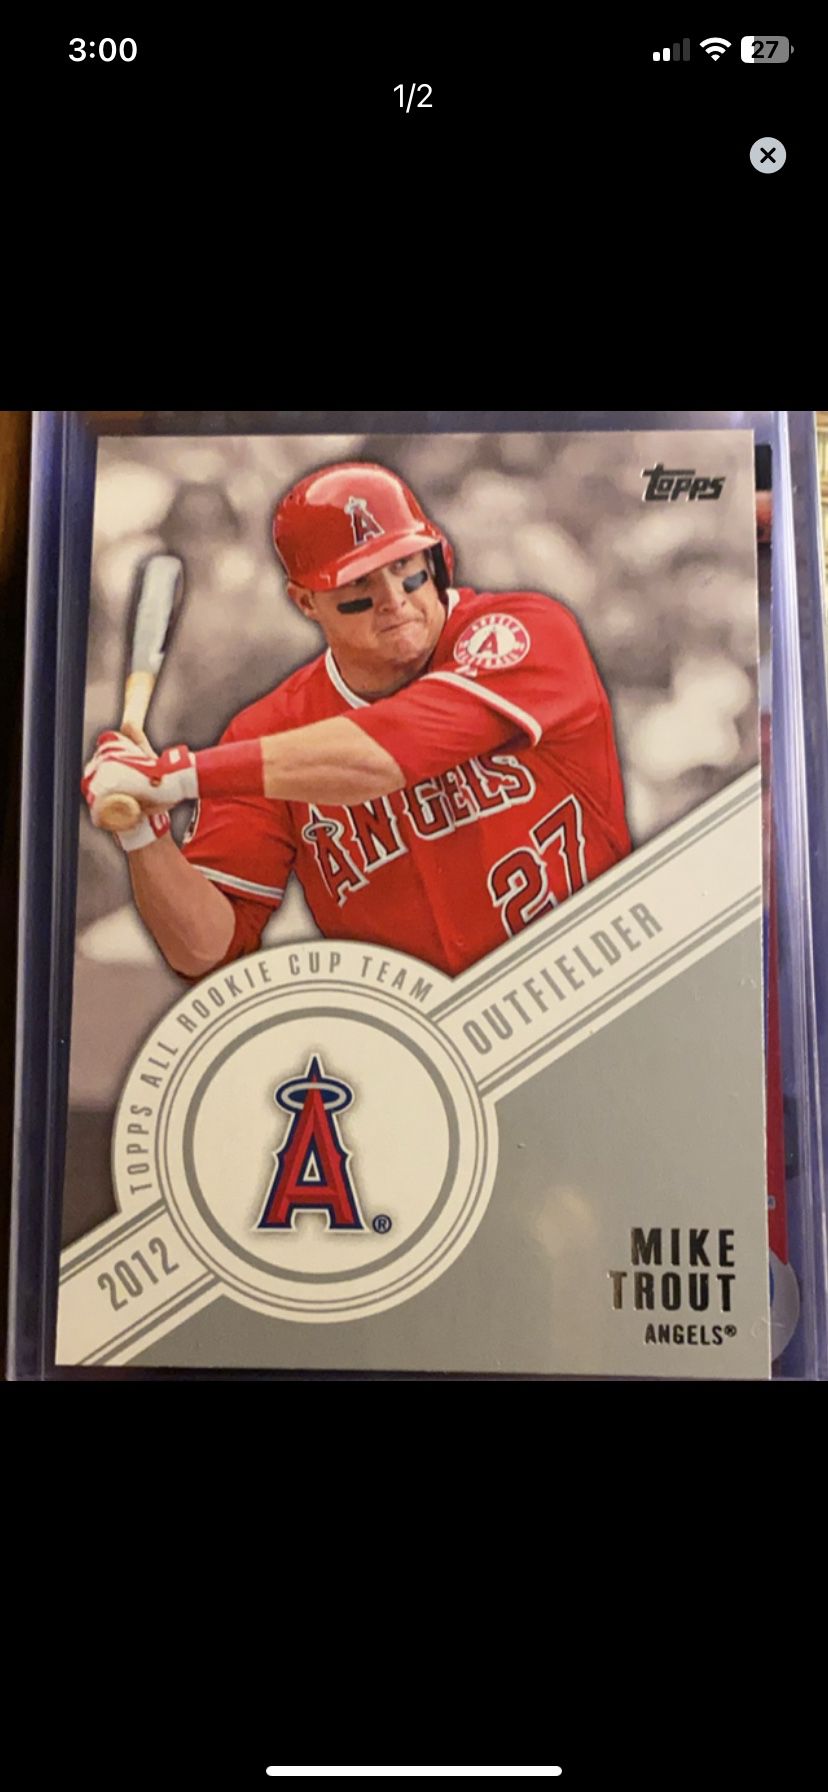 2014 Topps All Rookie Cup Mike Trout